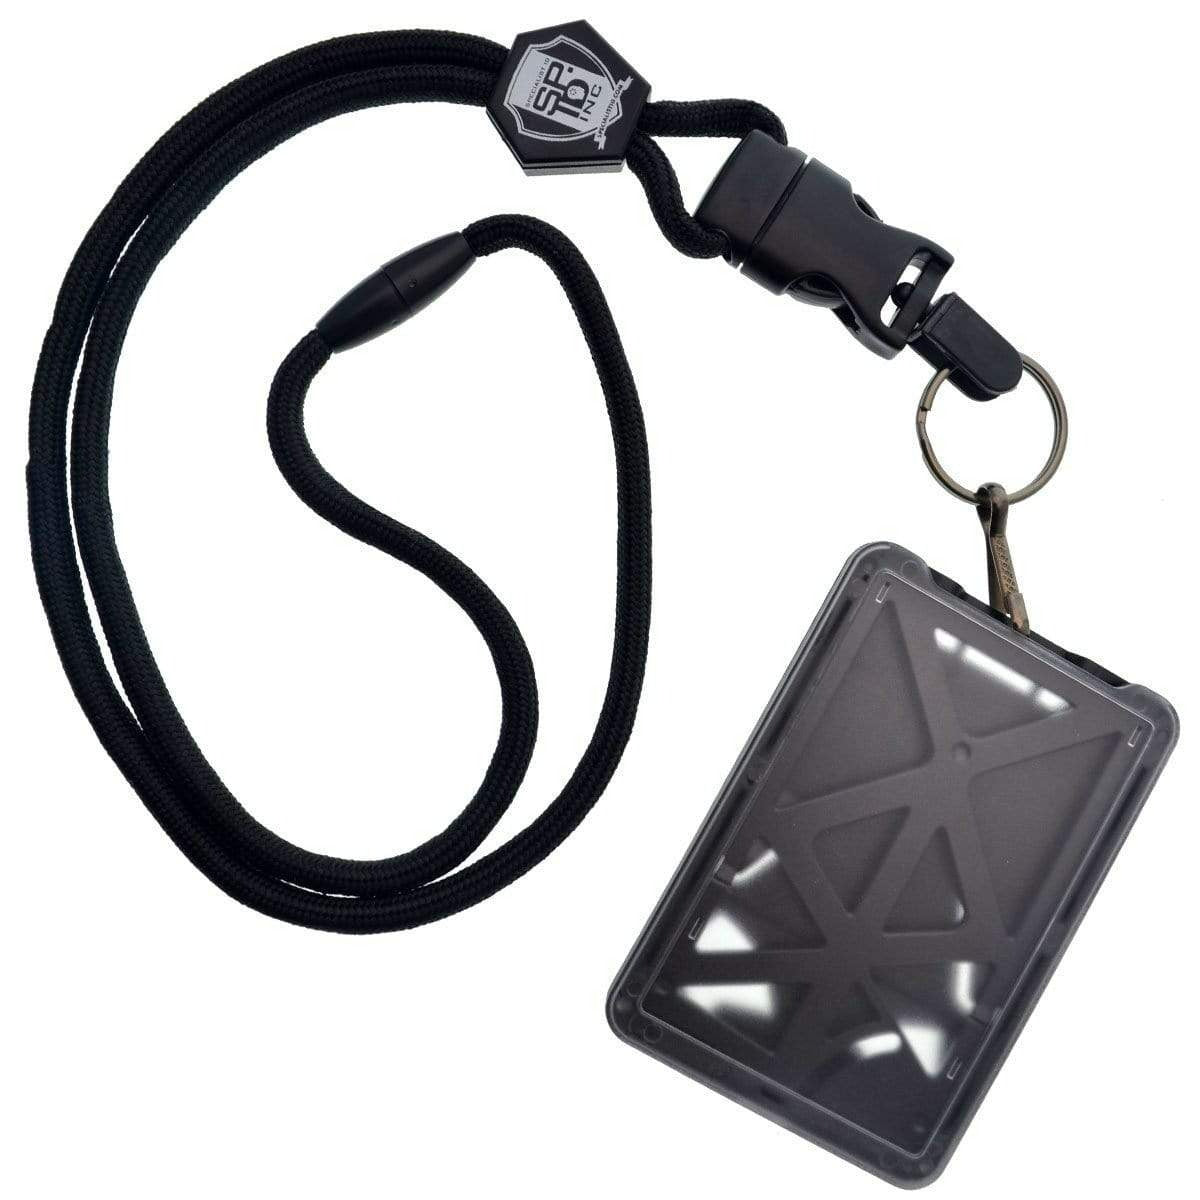 Black Top Loading THREE ID Card Badge Holder with Heavy Duty Lanyard w/ Detachable Metal Clip and Key Ring by Specialist ID SPID-9070-BLACK